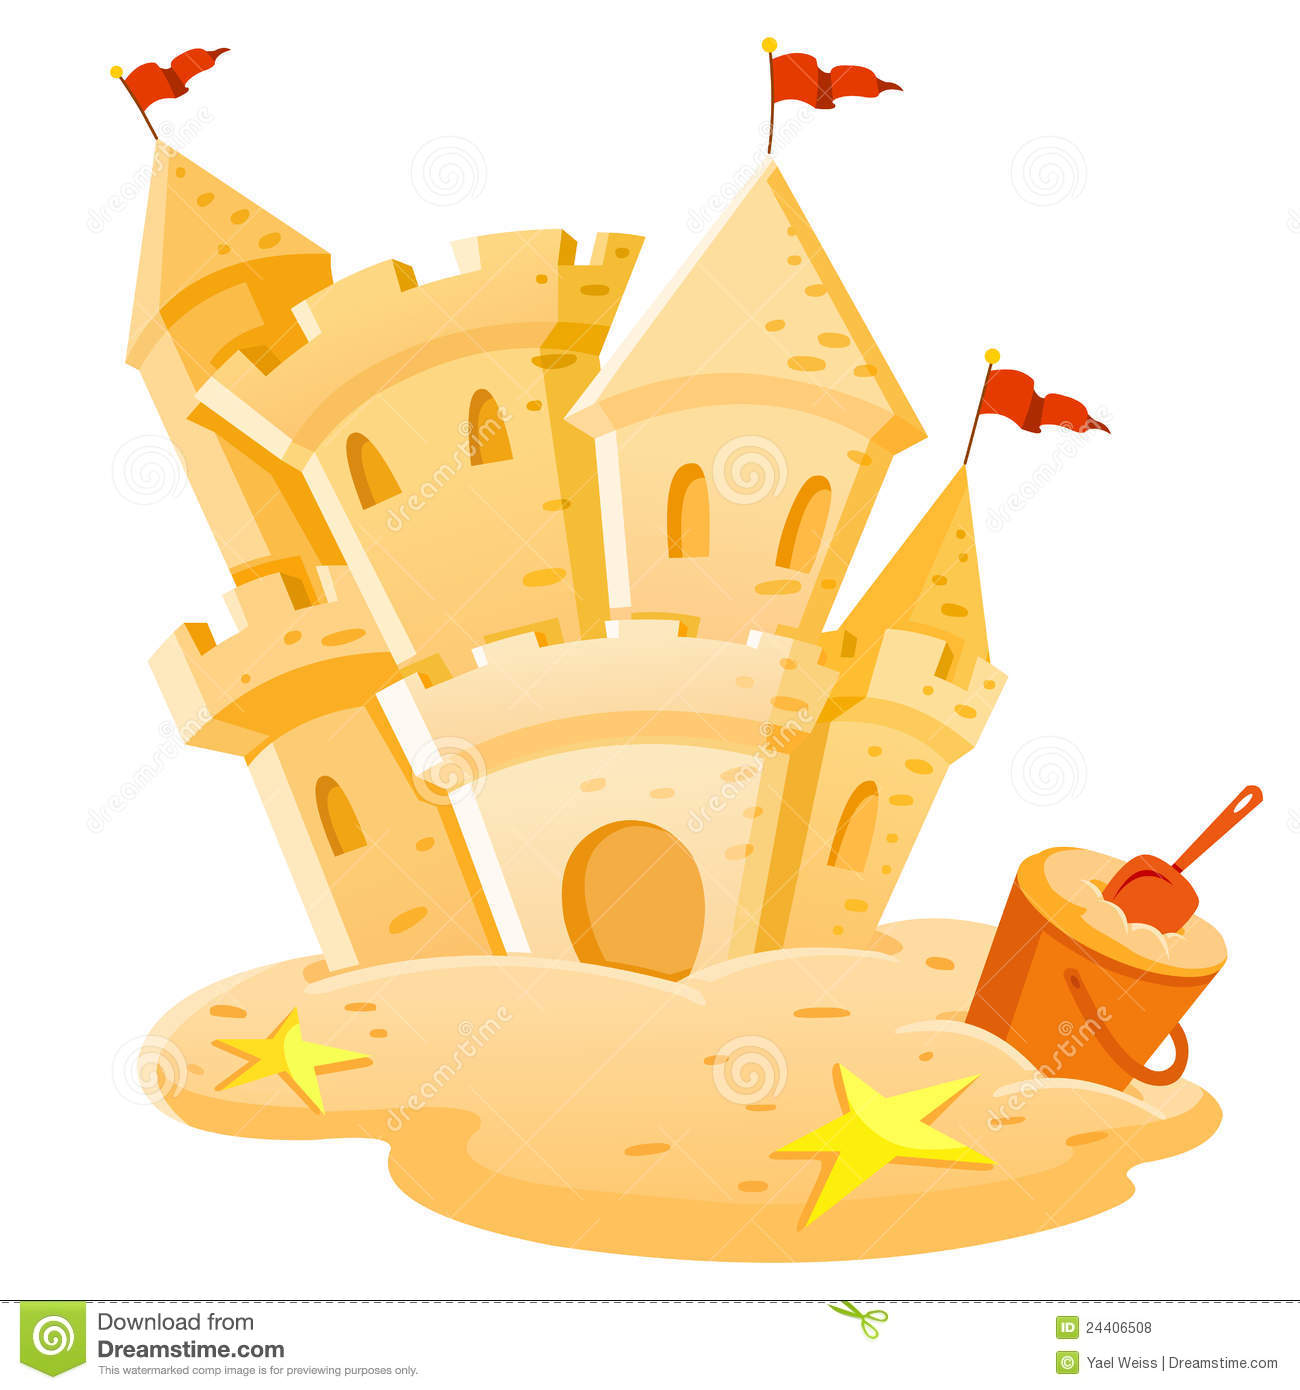 Sand Castle Royalty Free Stock Photos   Image  24406508